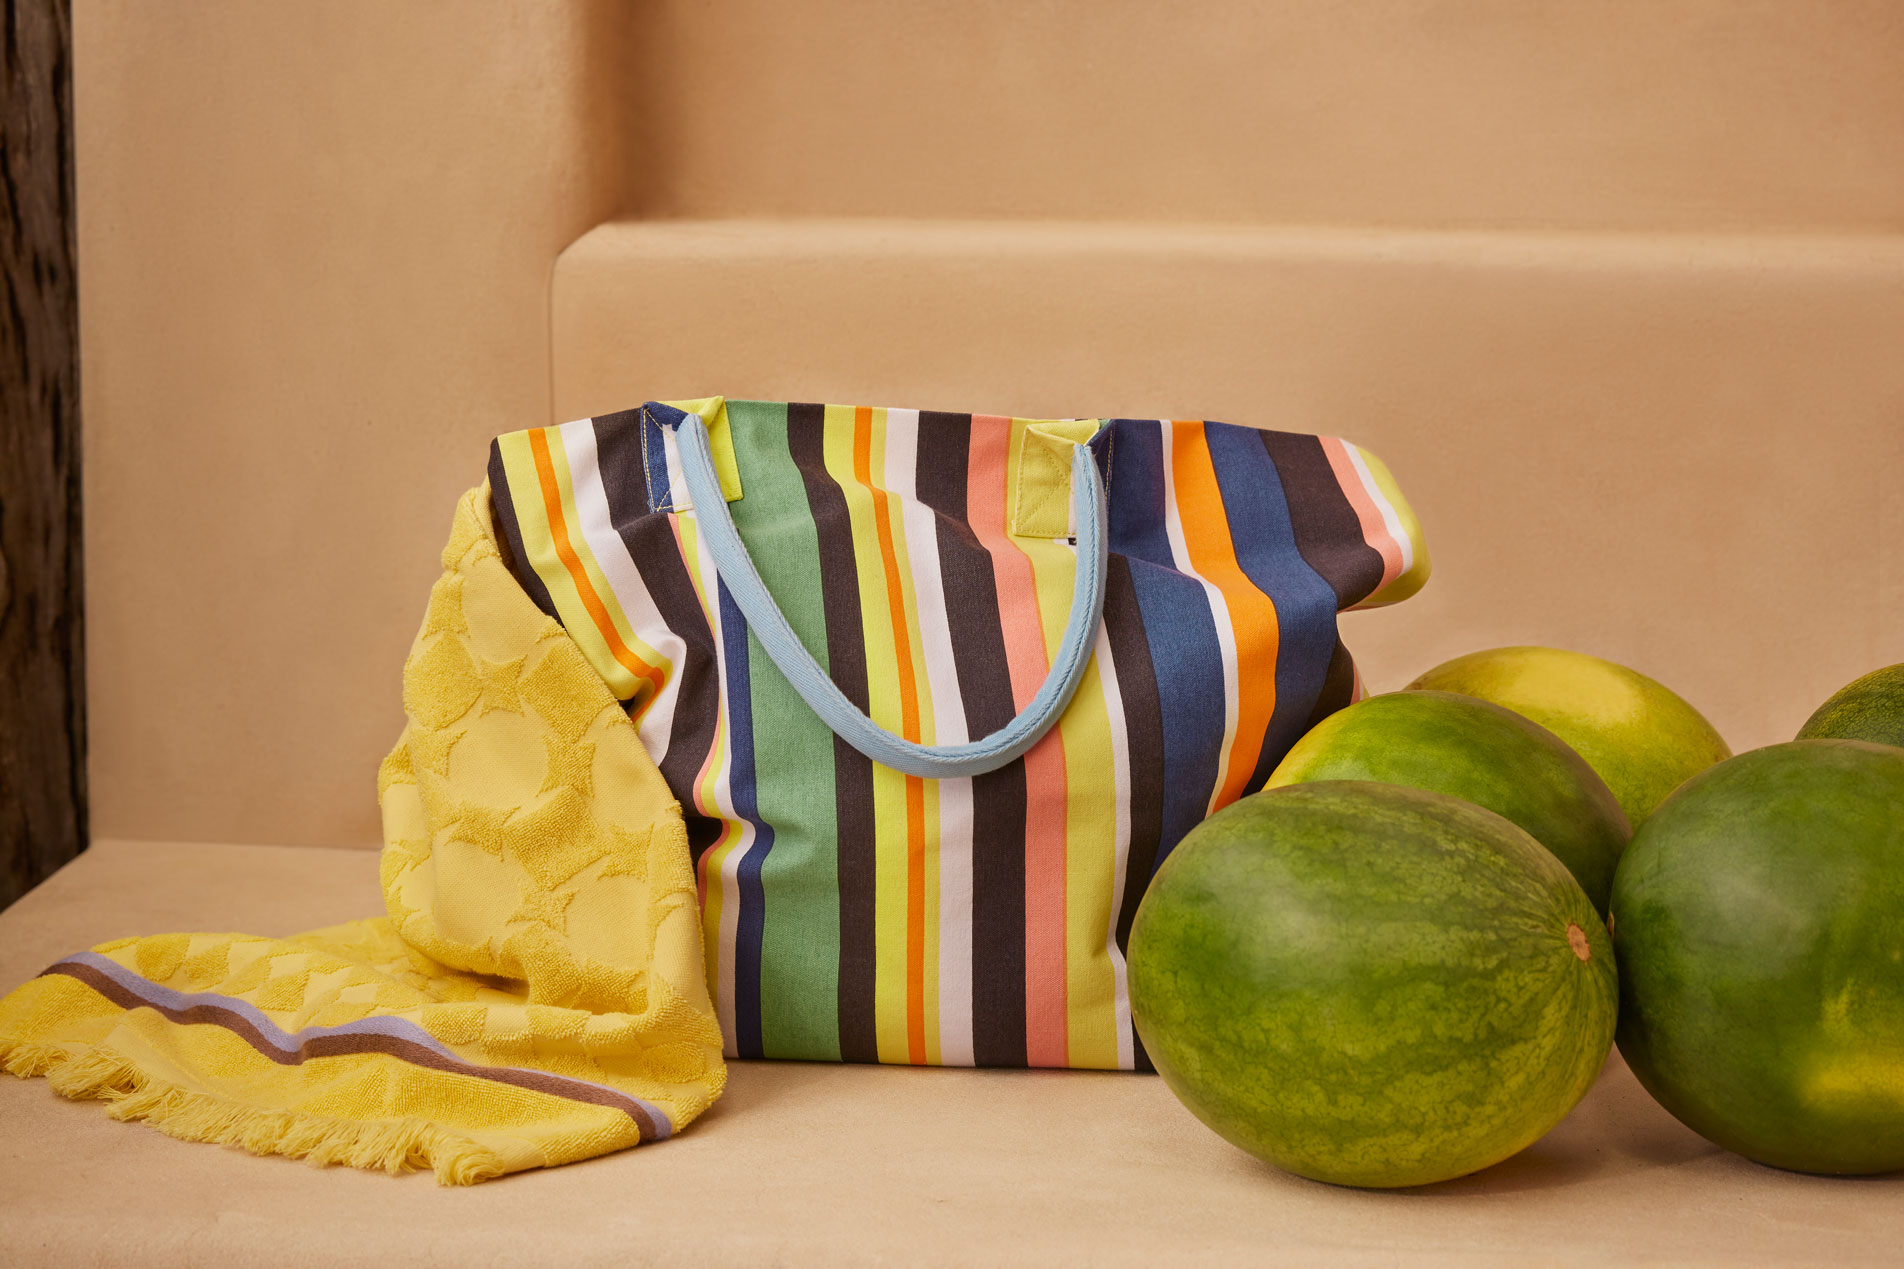 A striped beach bag sitting on a ledge with a yellow beach towel draped over it. Five watermelons sit beside it.